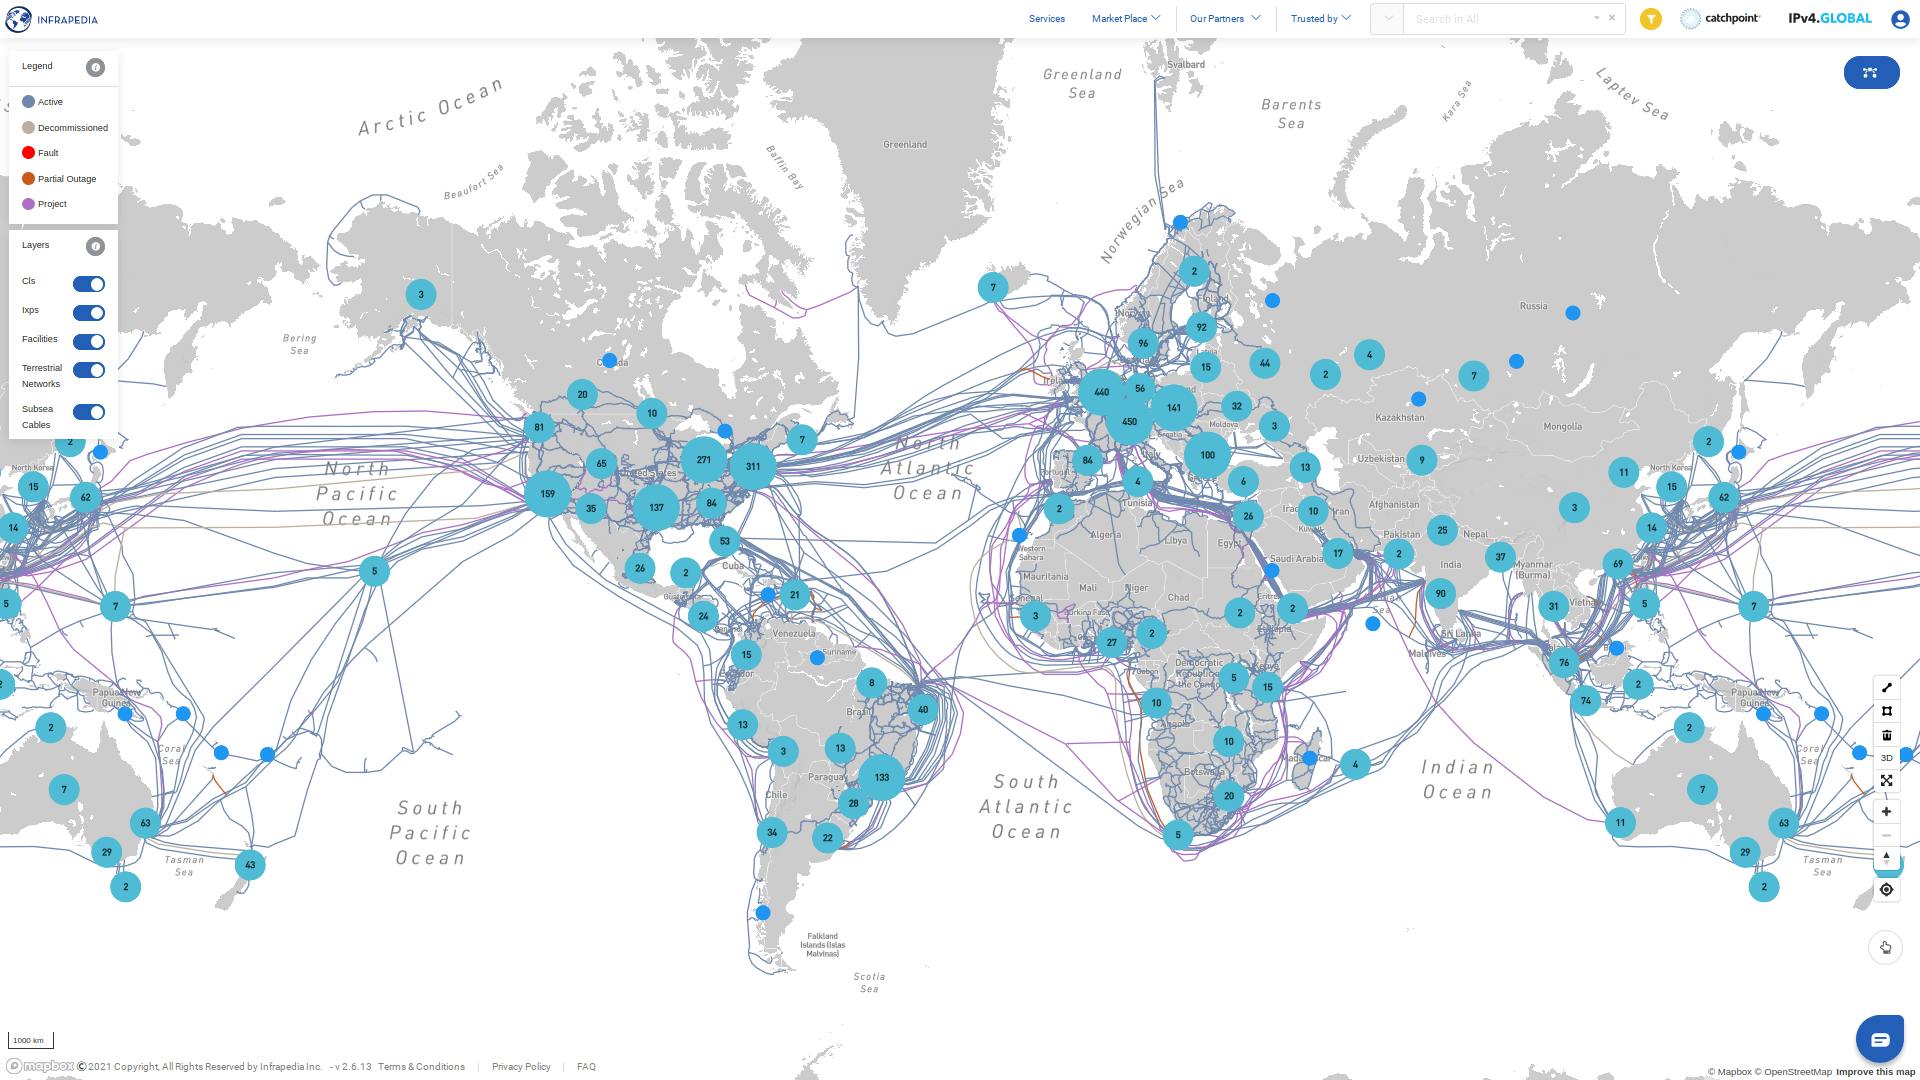 Map of the Internet's global infrastructure